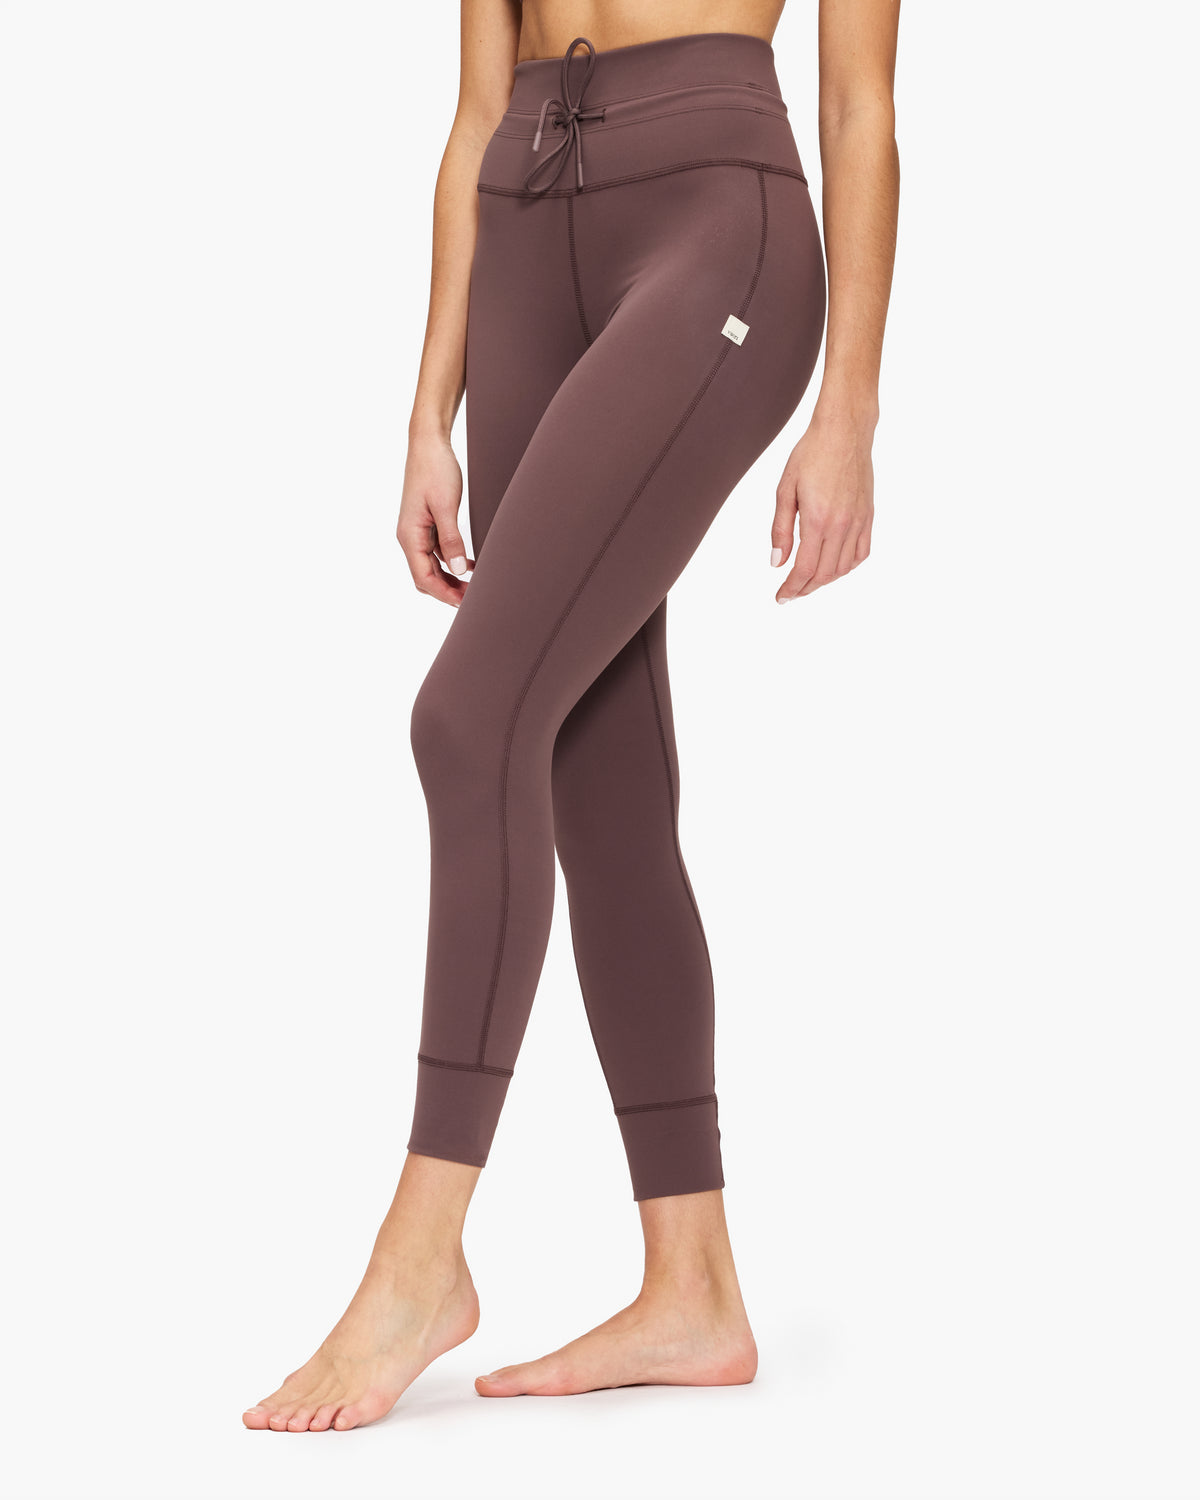 Nux One by One Legging – The Shop at Equinox